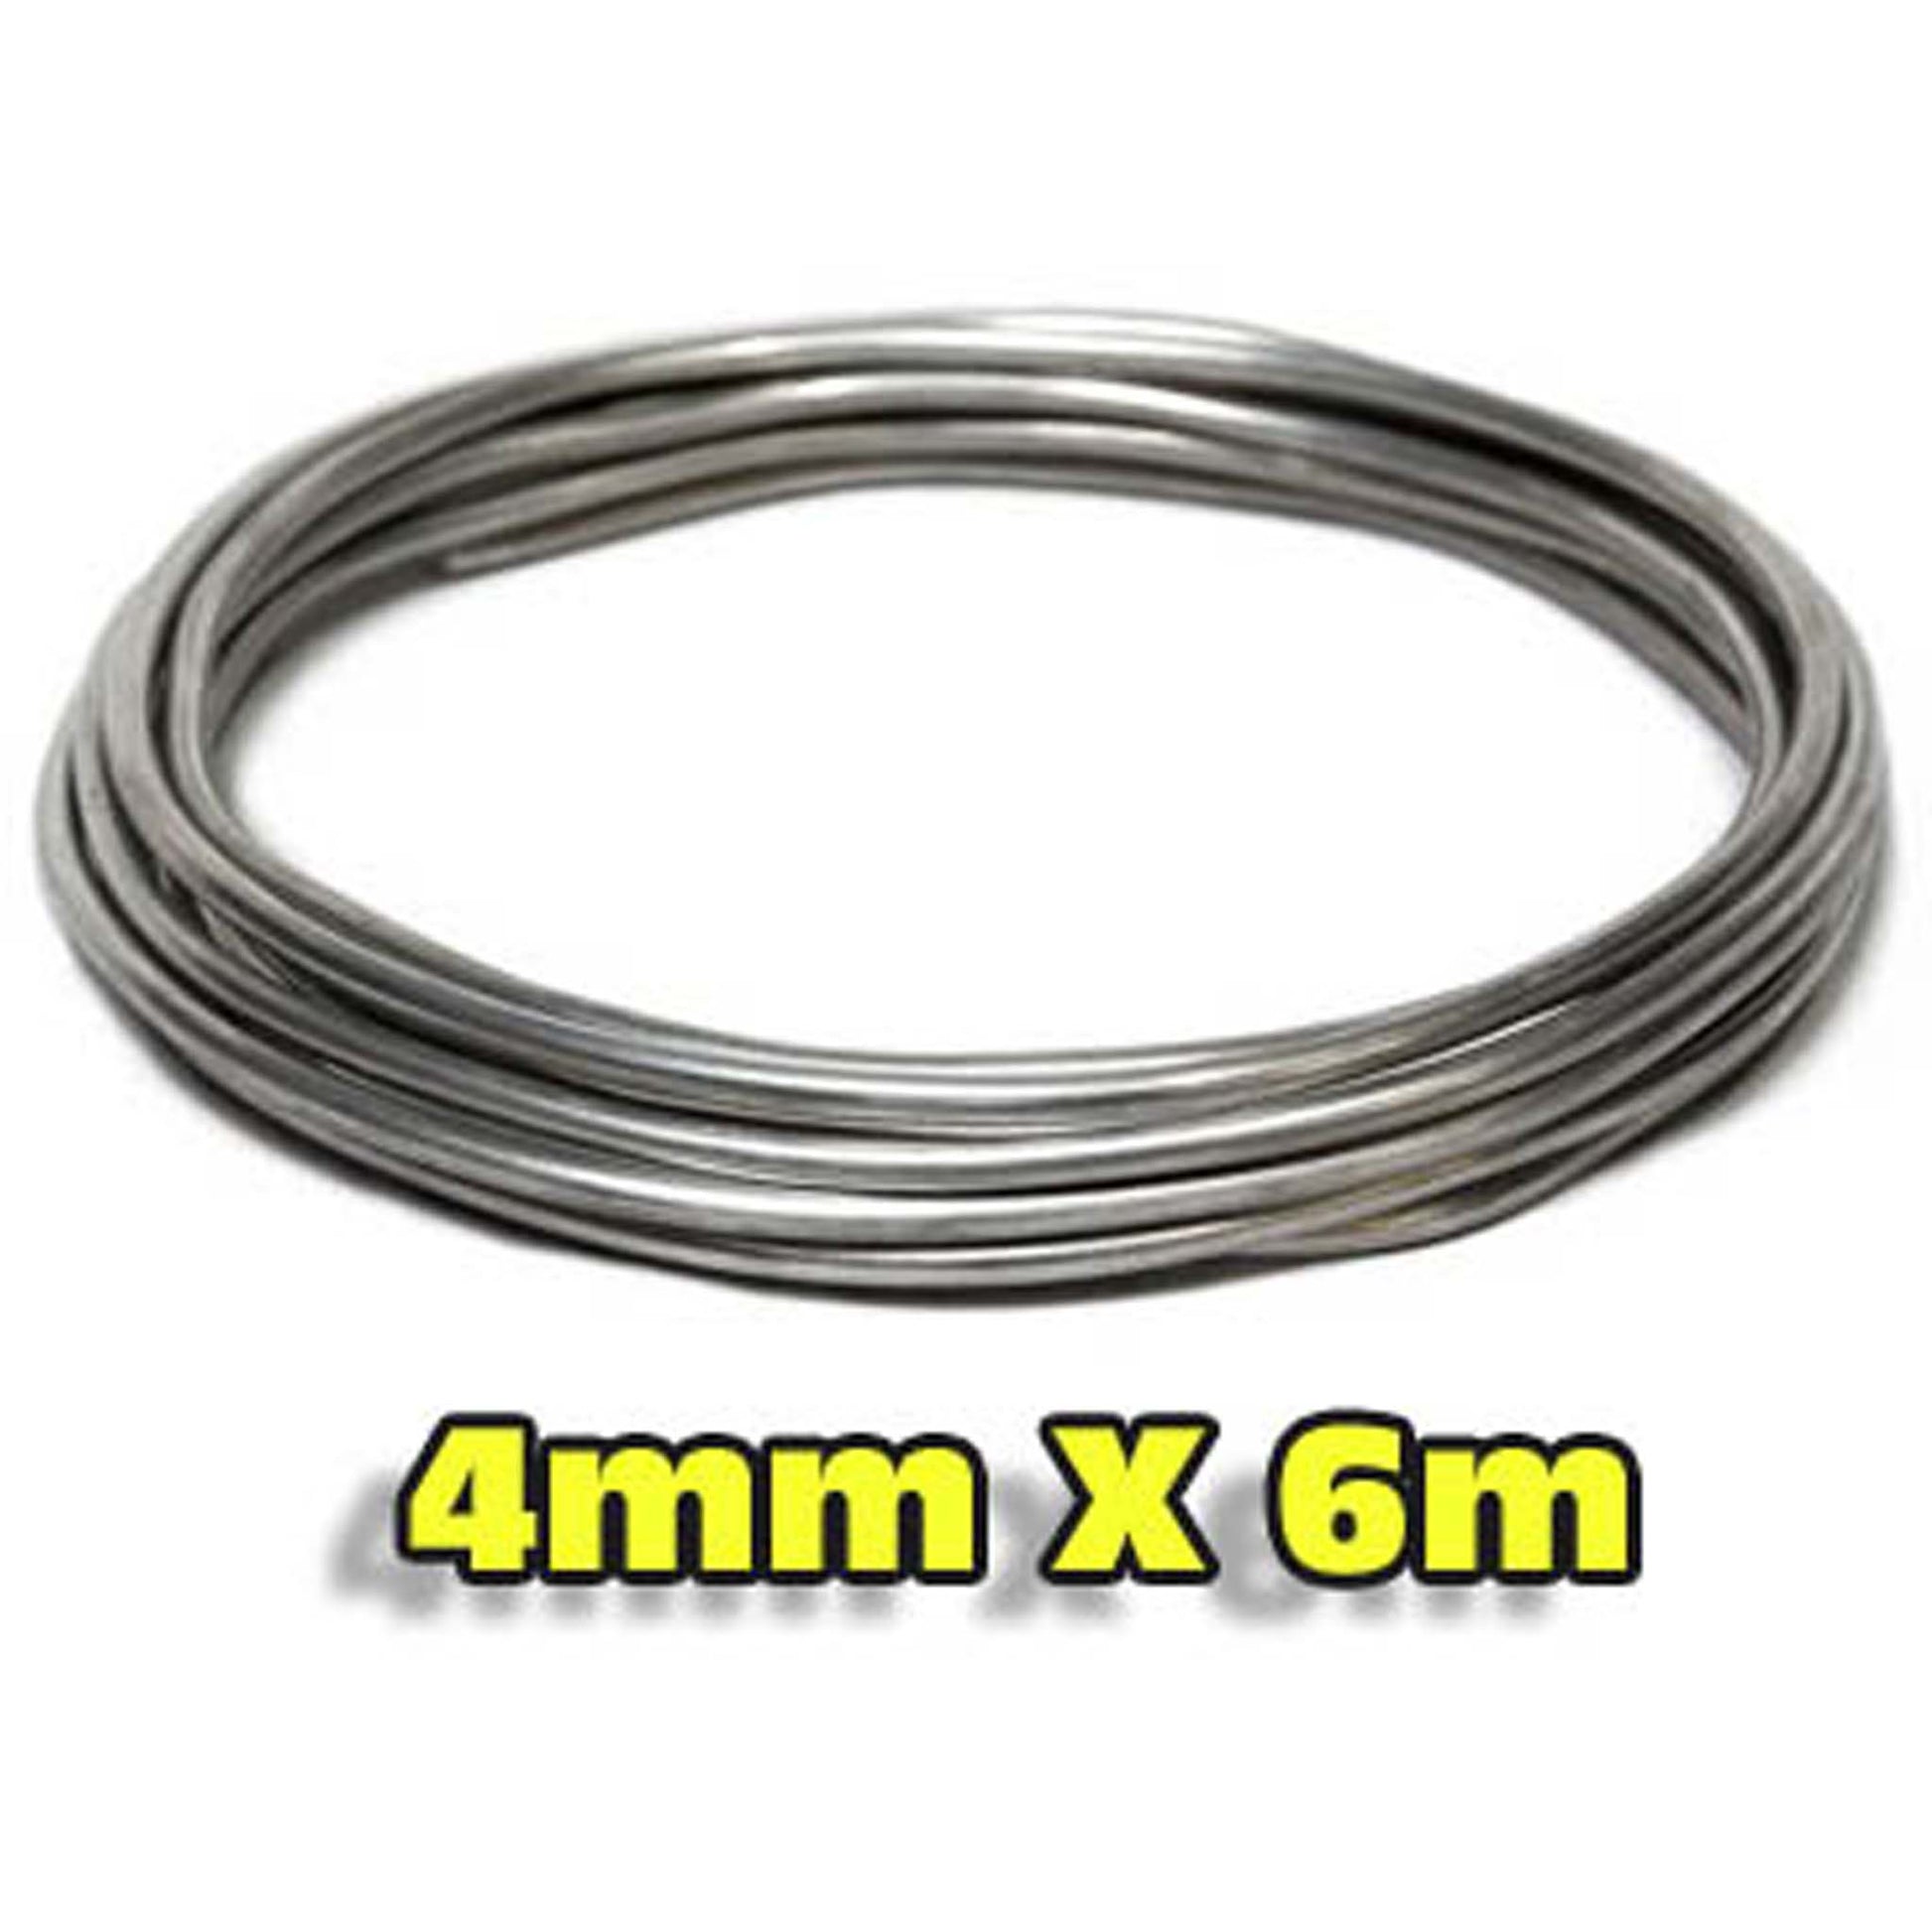 A 4mm by 6m spool of annealed aluminum craft wire for stop motion armatures.